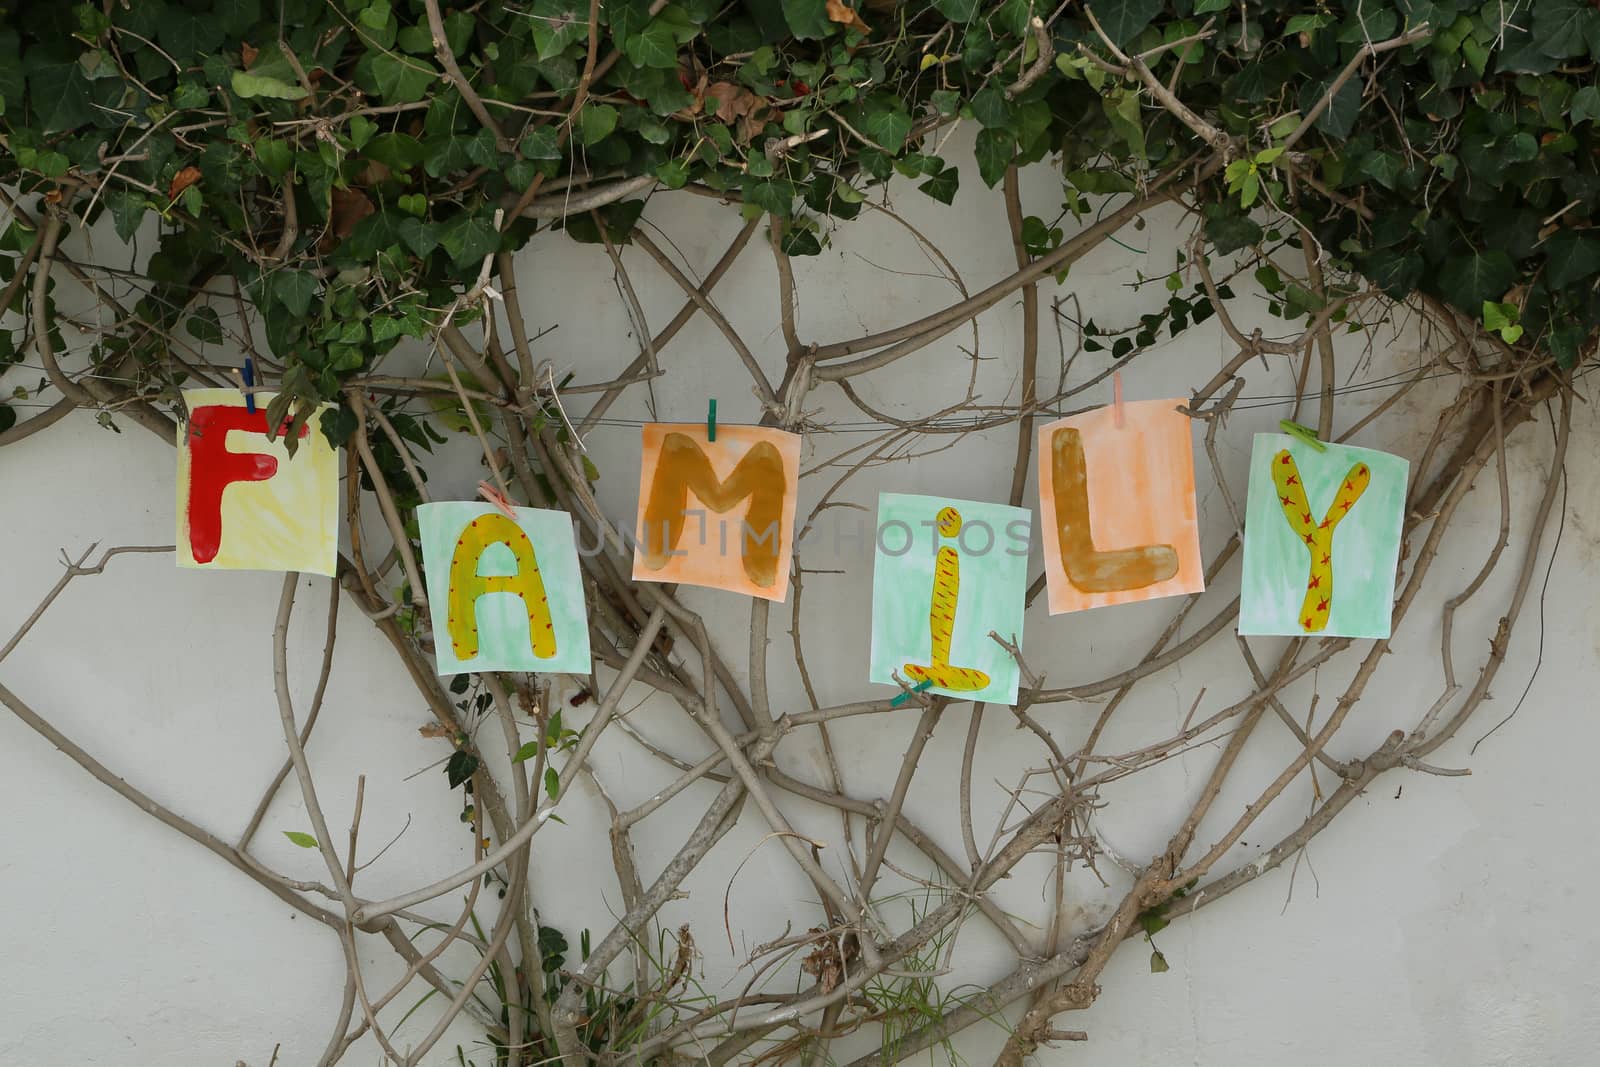 Word "FAMILY" painted on the paper A4 format and attached to the branches of the tree